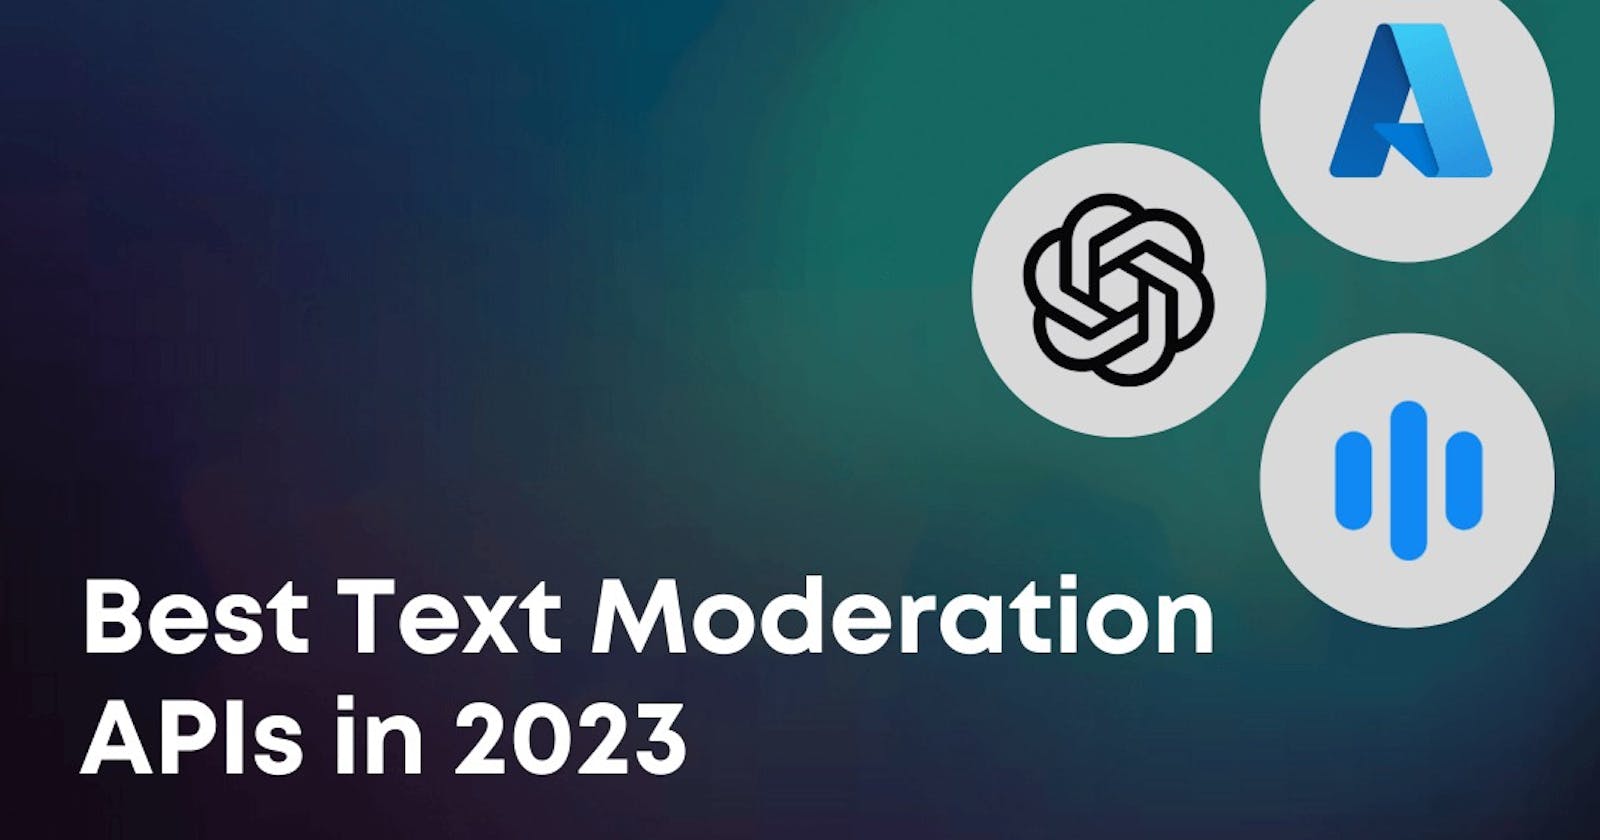 Best Text Moderation APIs in 2023